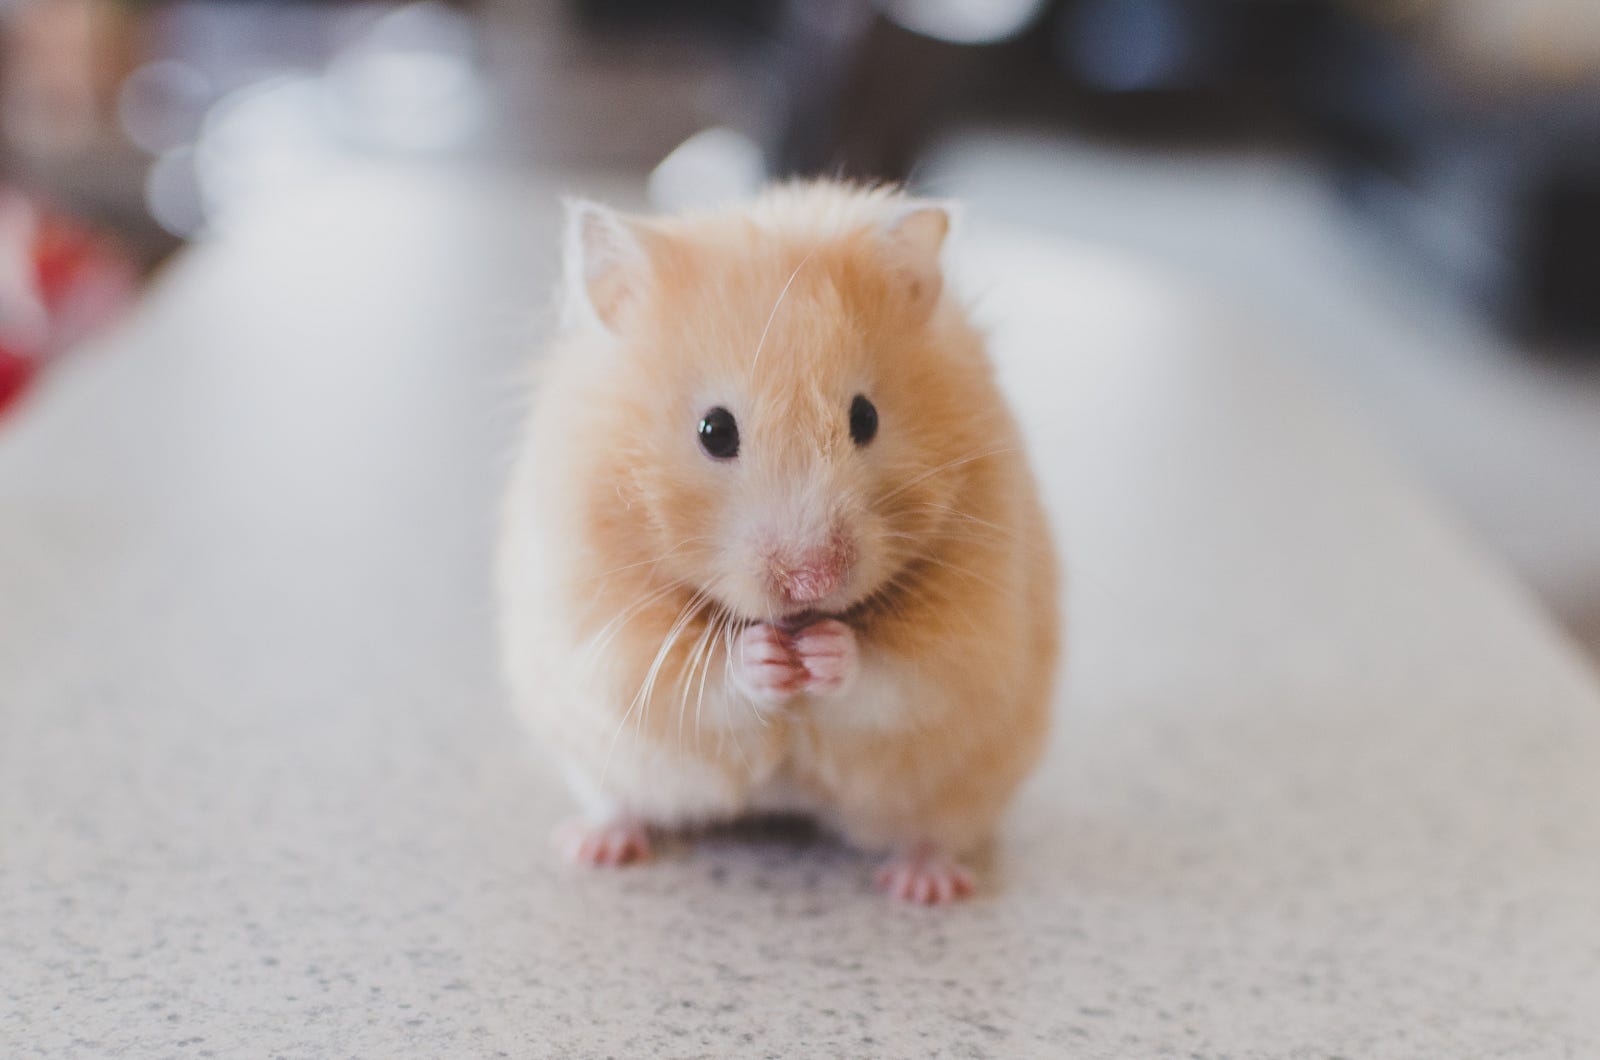 A cute light brown and white mouse looks at us, his little hands up to his mouth. A recent research investigation shows that repetitive brief exposure to methanol impacts the immune system of mice with dementia. When the animals smell the substance, they do not experience cognitive decline.